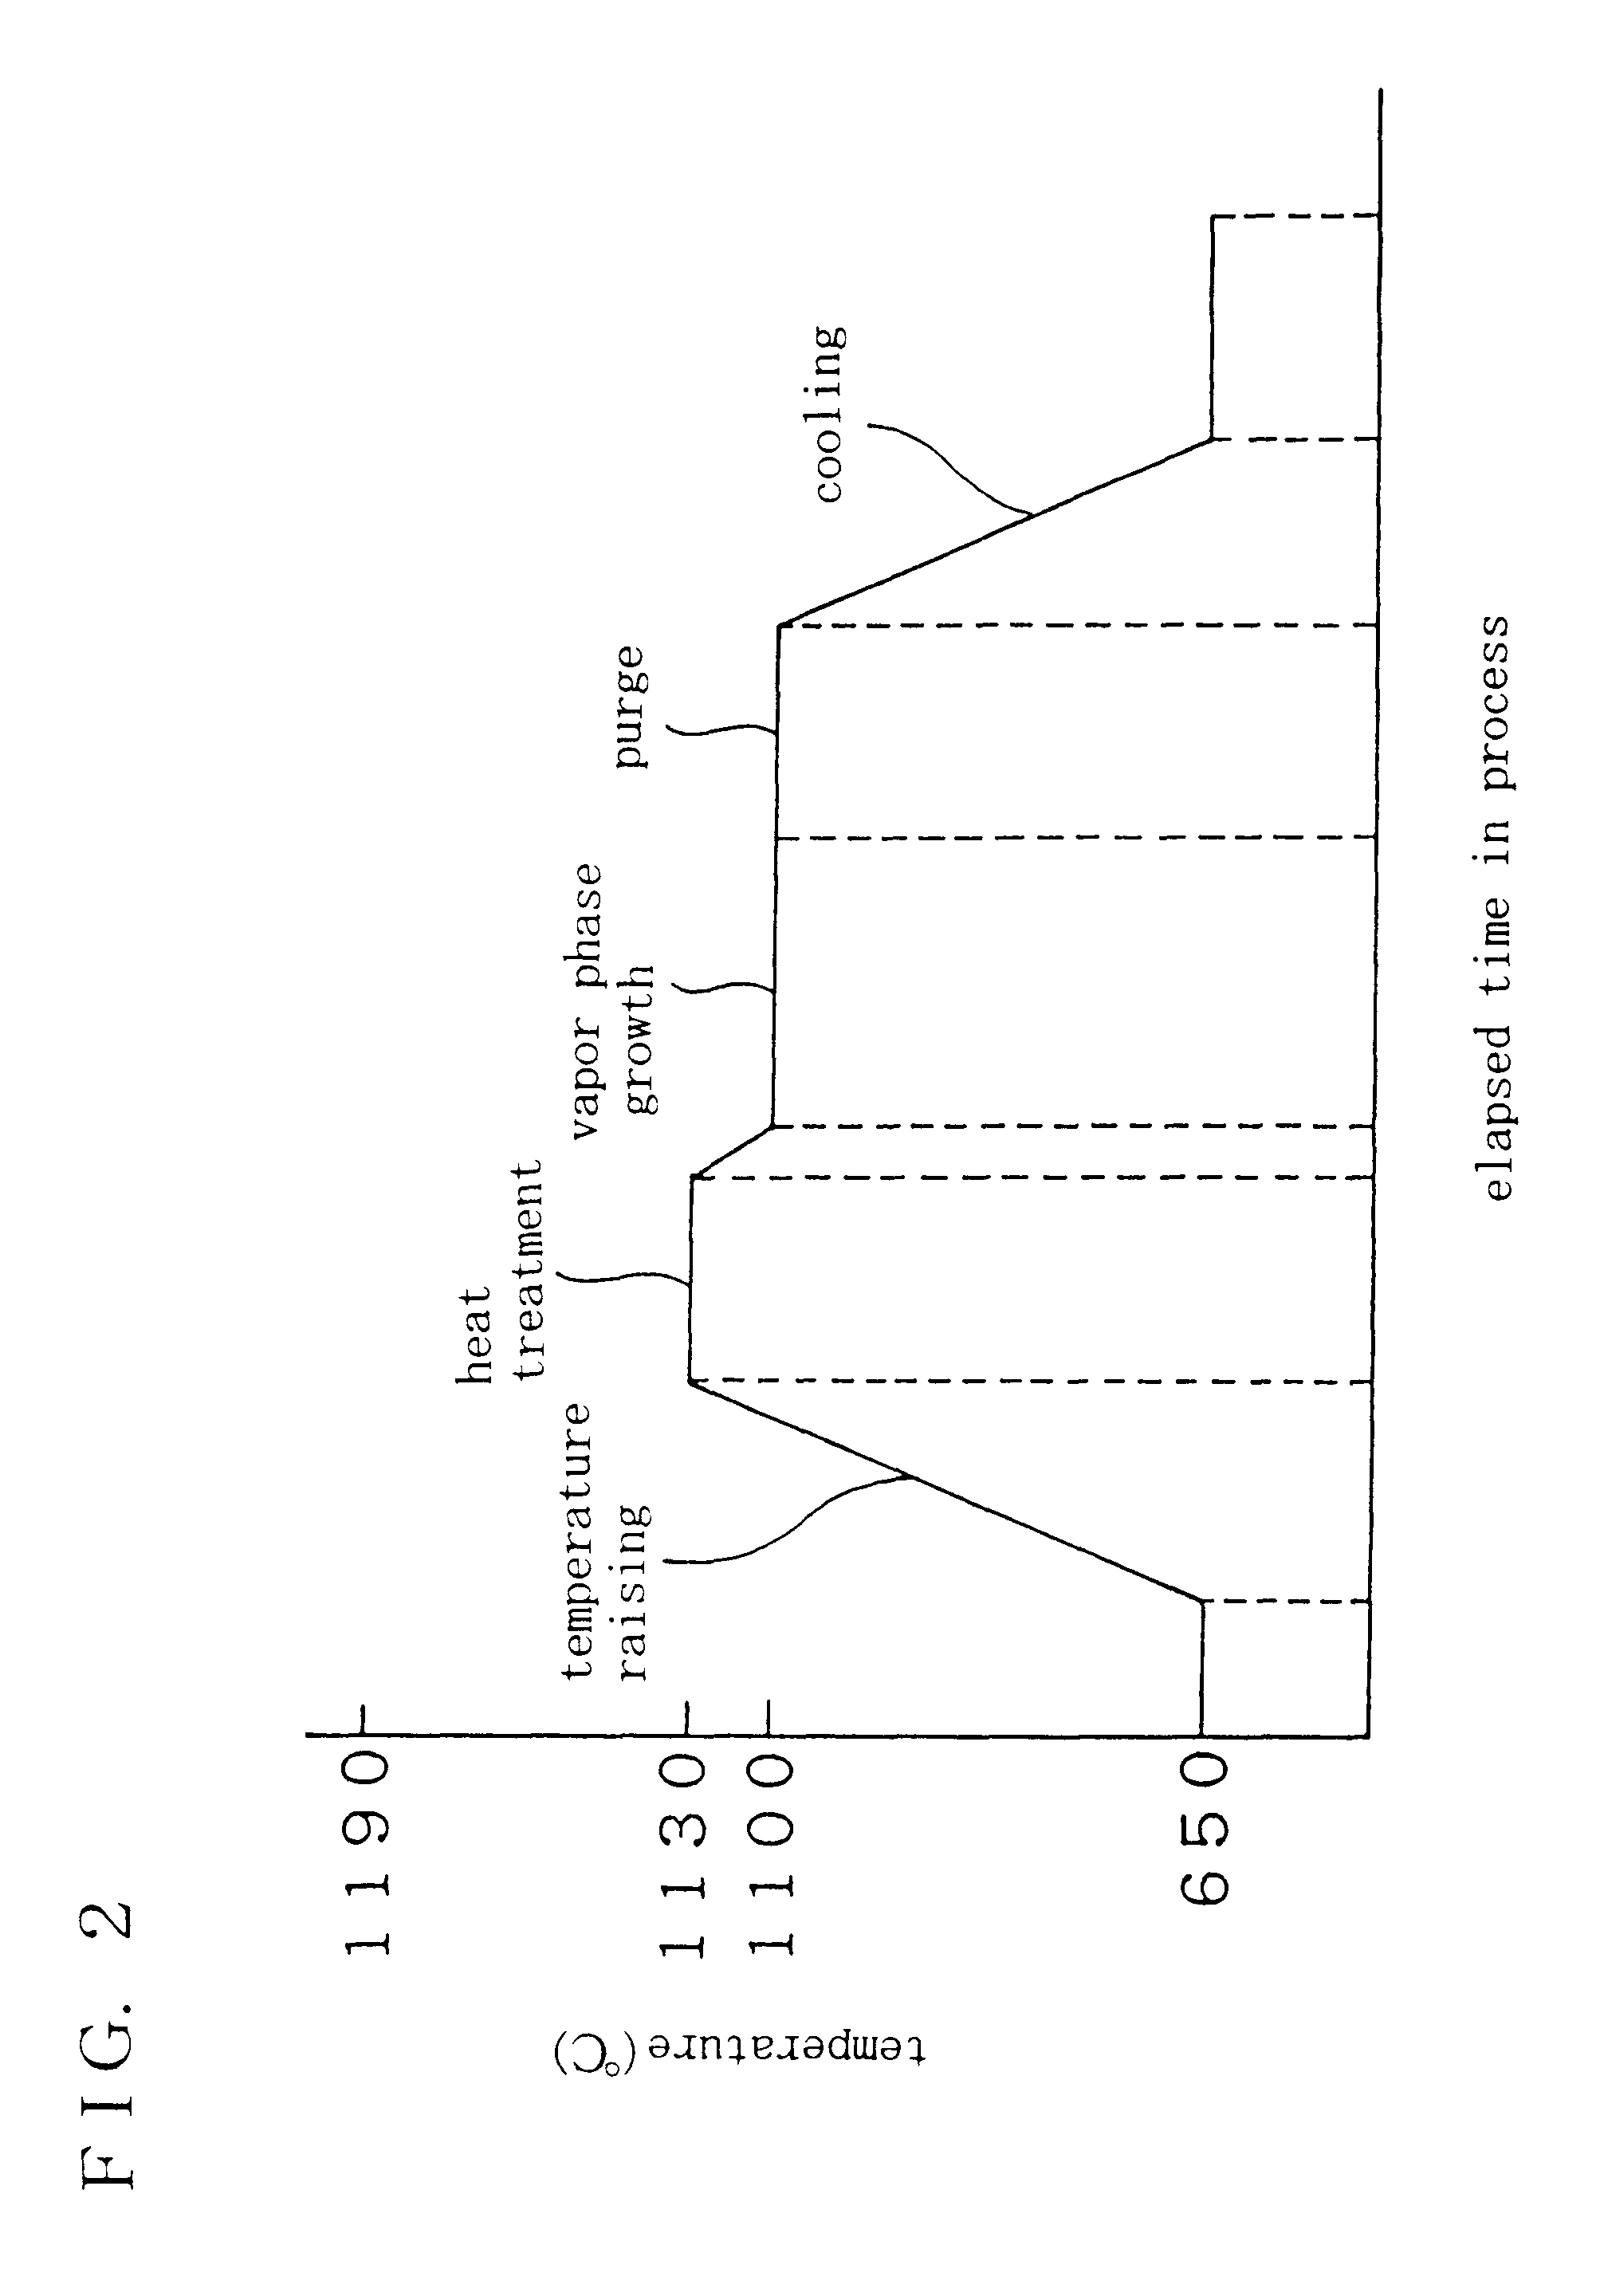 Semiconductor wafer and vapor growth apparatus